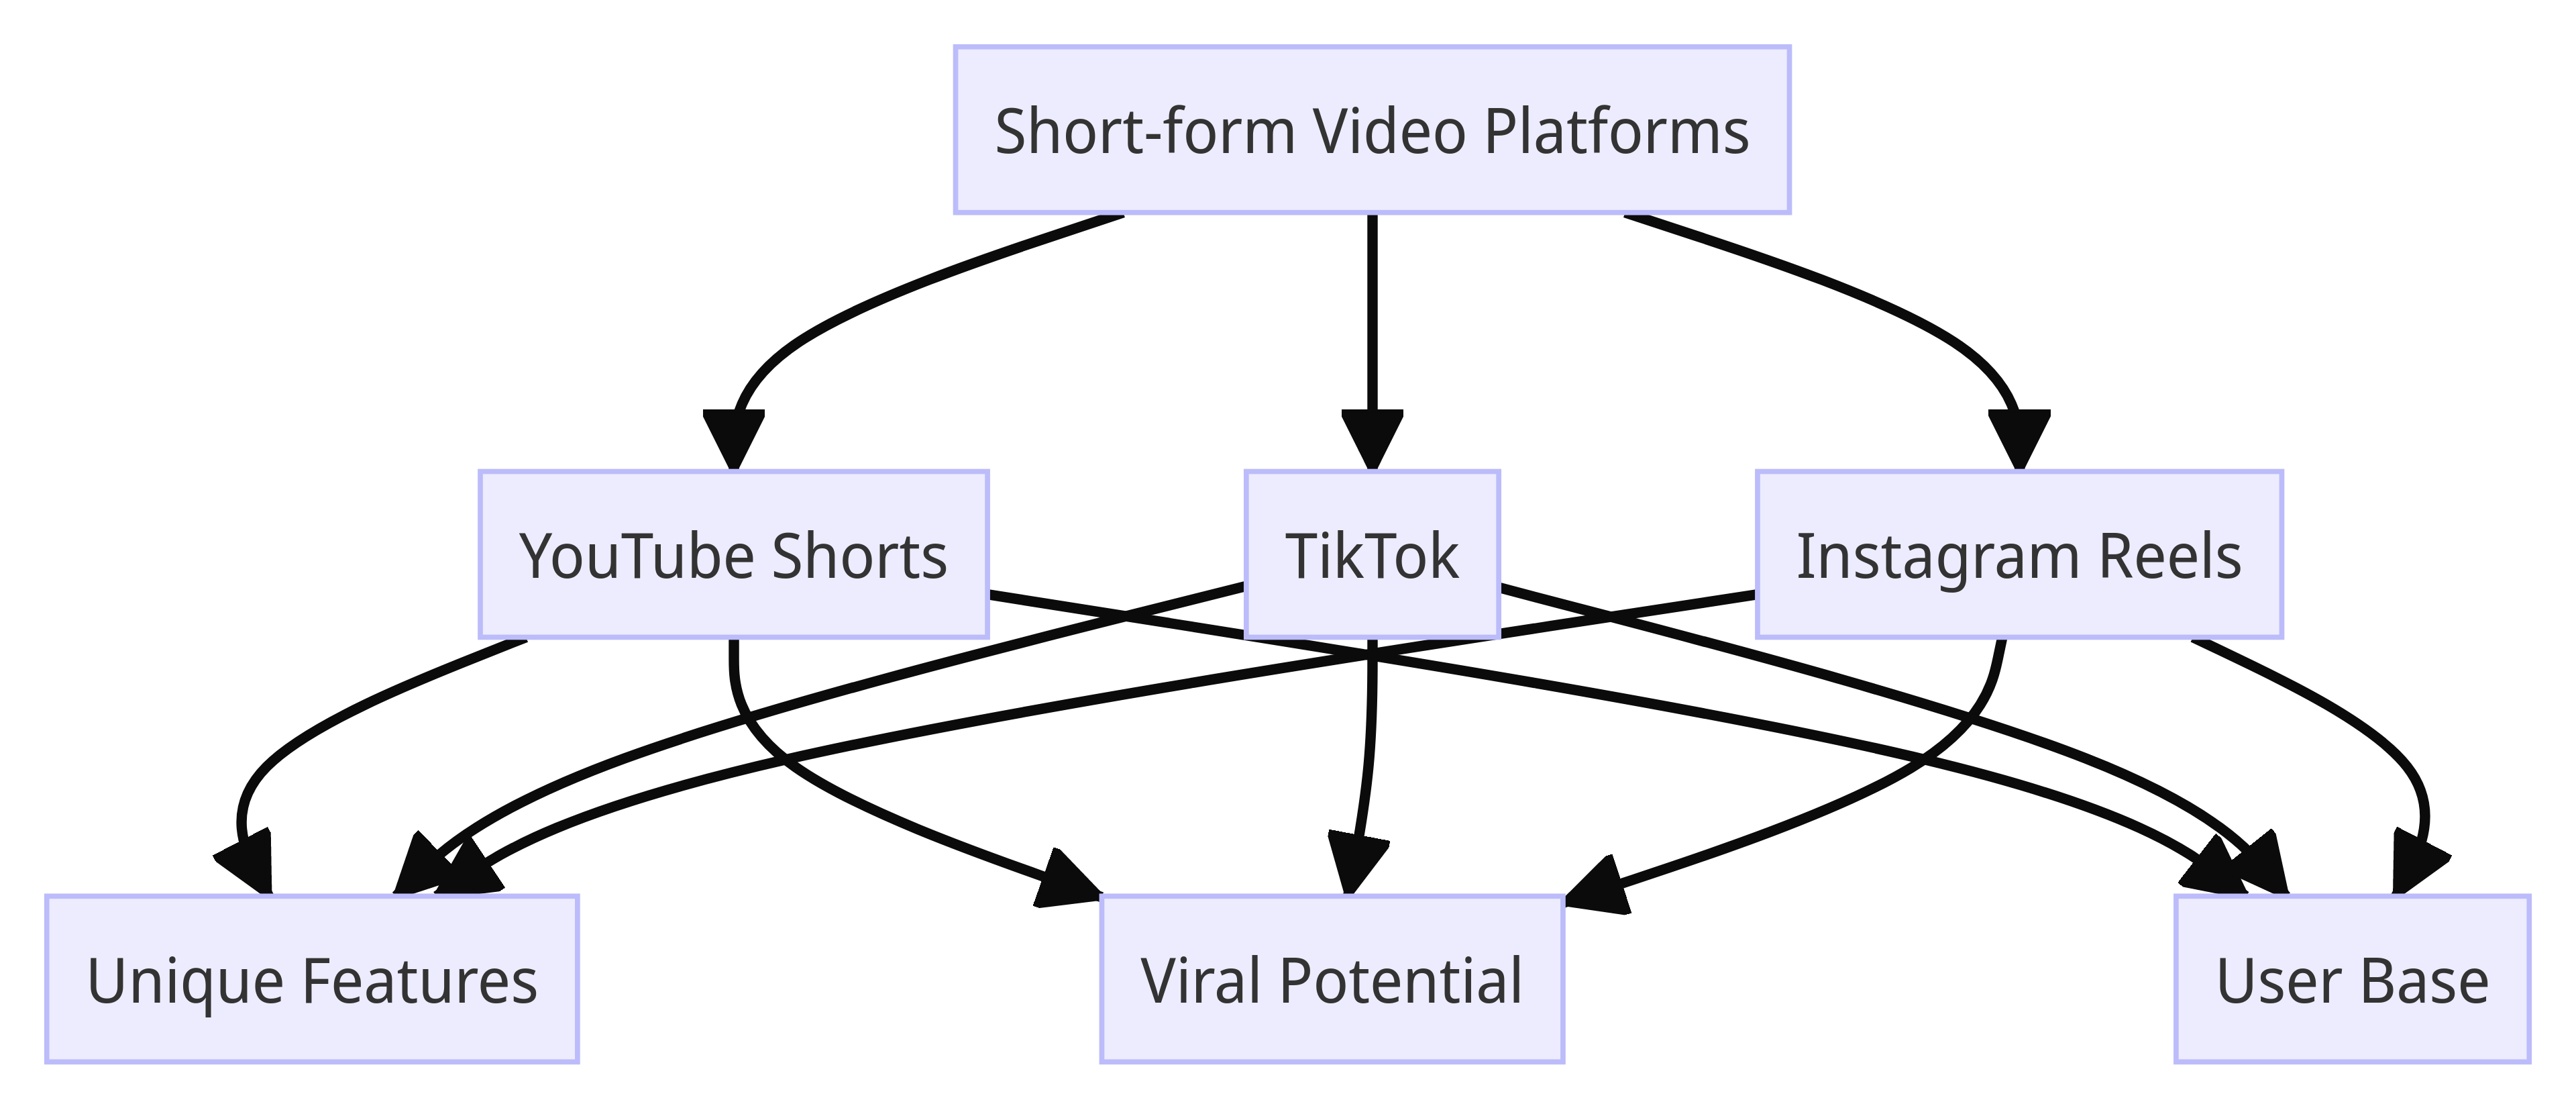 Comparative Analysis in a grpah tiktok , youtube, instagram reels